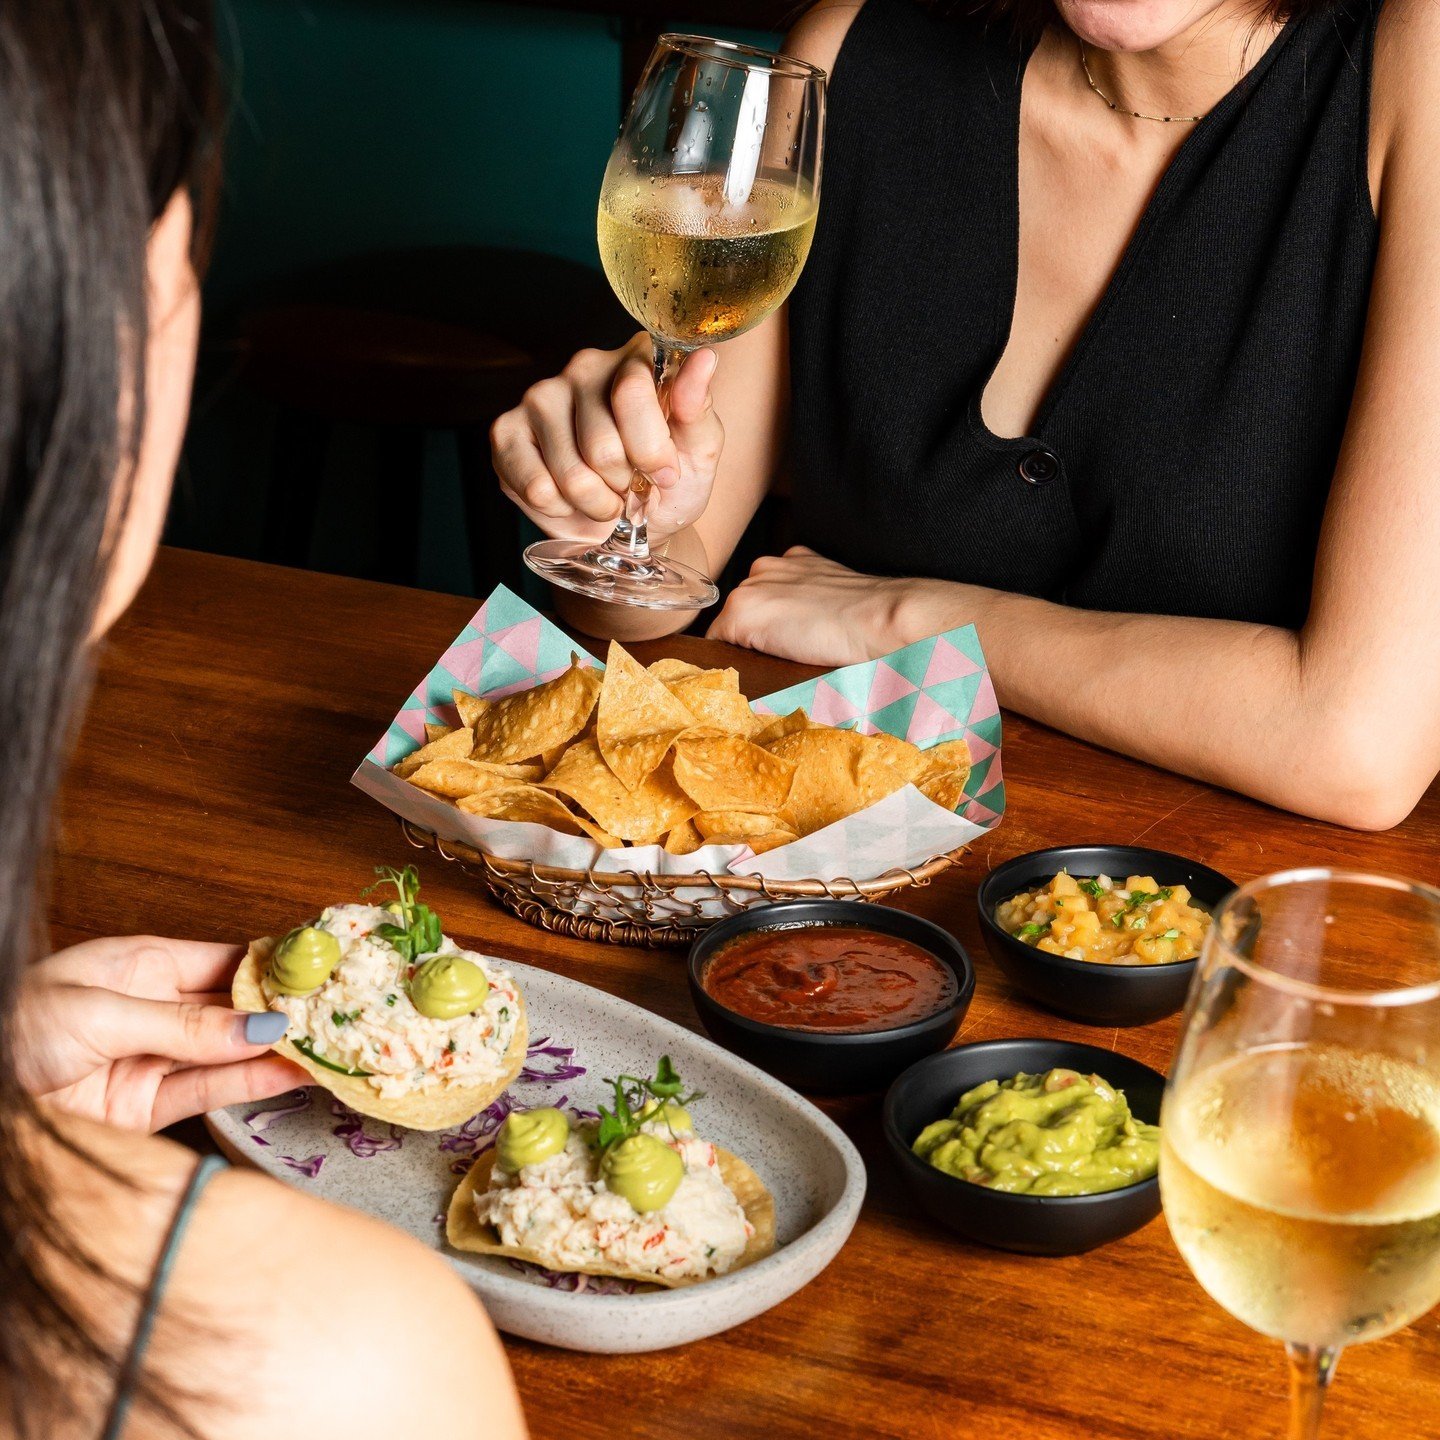 Ah, picture this: the perfect pairing &ndash; a glass of zesty Buronga Sauvignon Blanc in one hand and our Tuna Tostadas in the other 😋 ⁠
⁠
The crisp, refreshing white perfectly complements the fresh seafood and creamy sauce in the tostadas 🎉 It's 